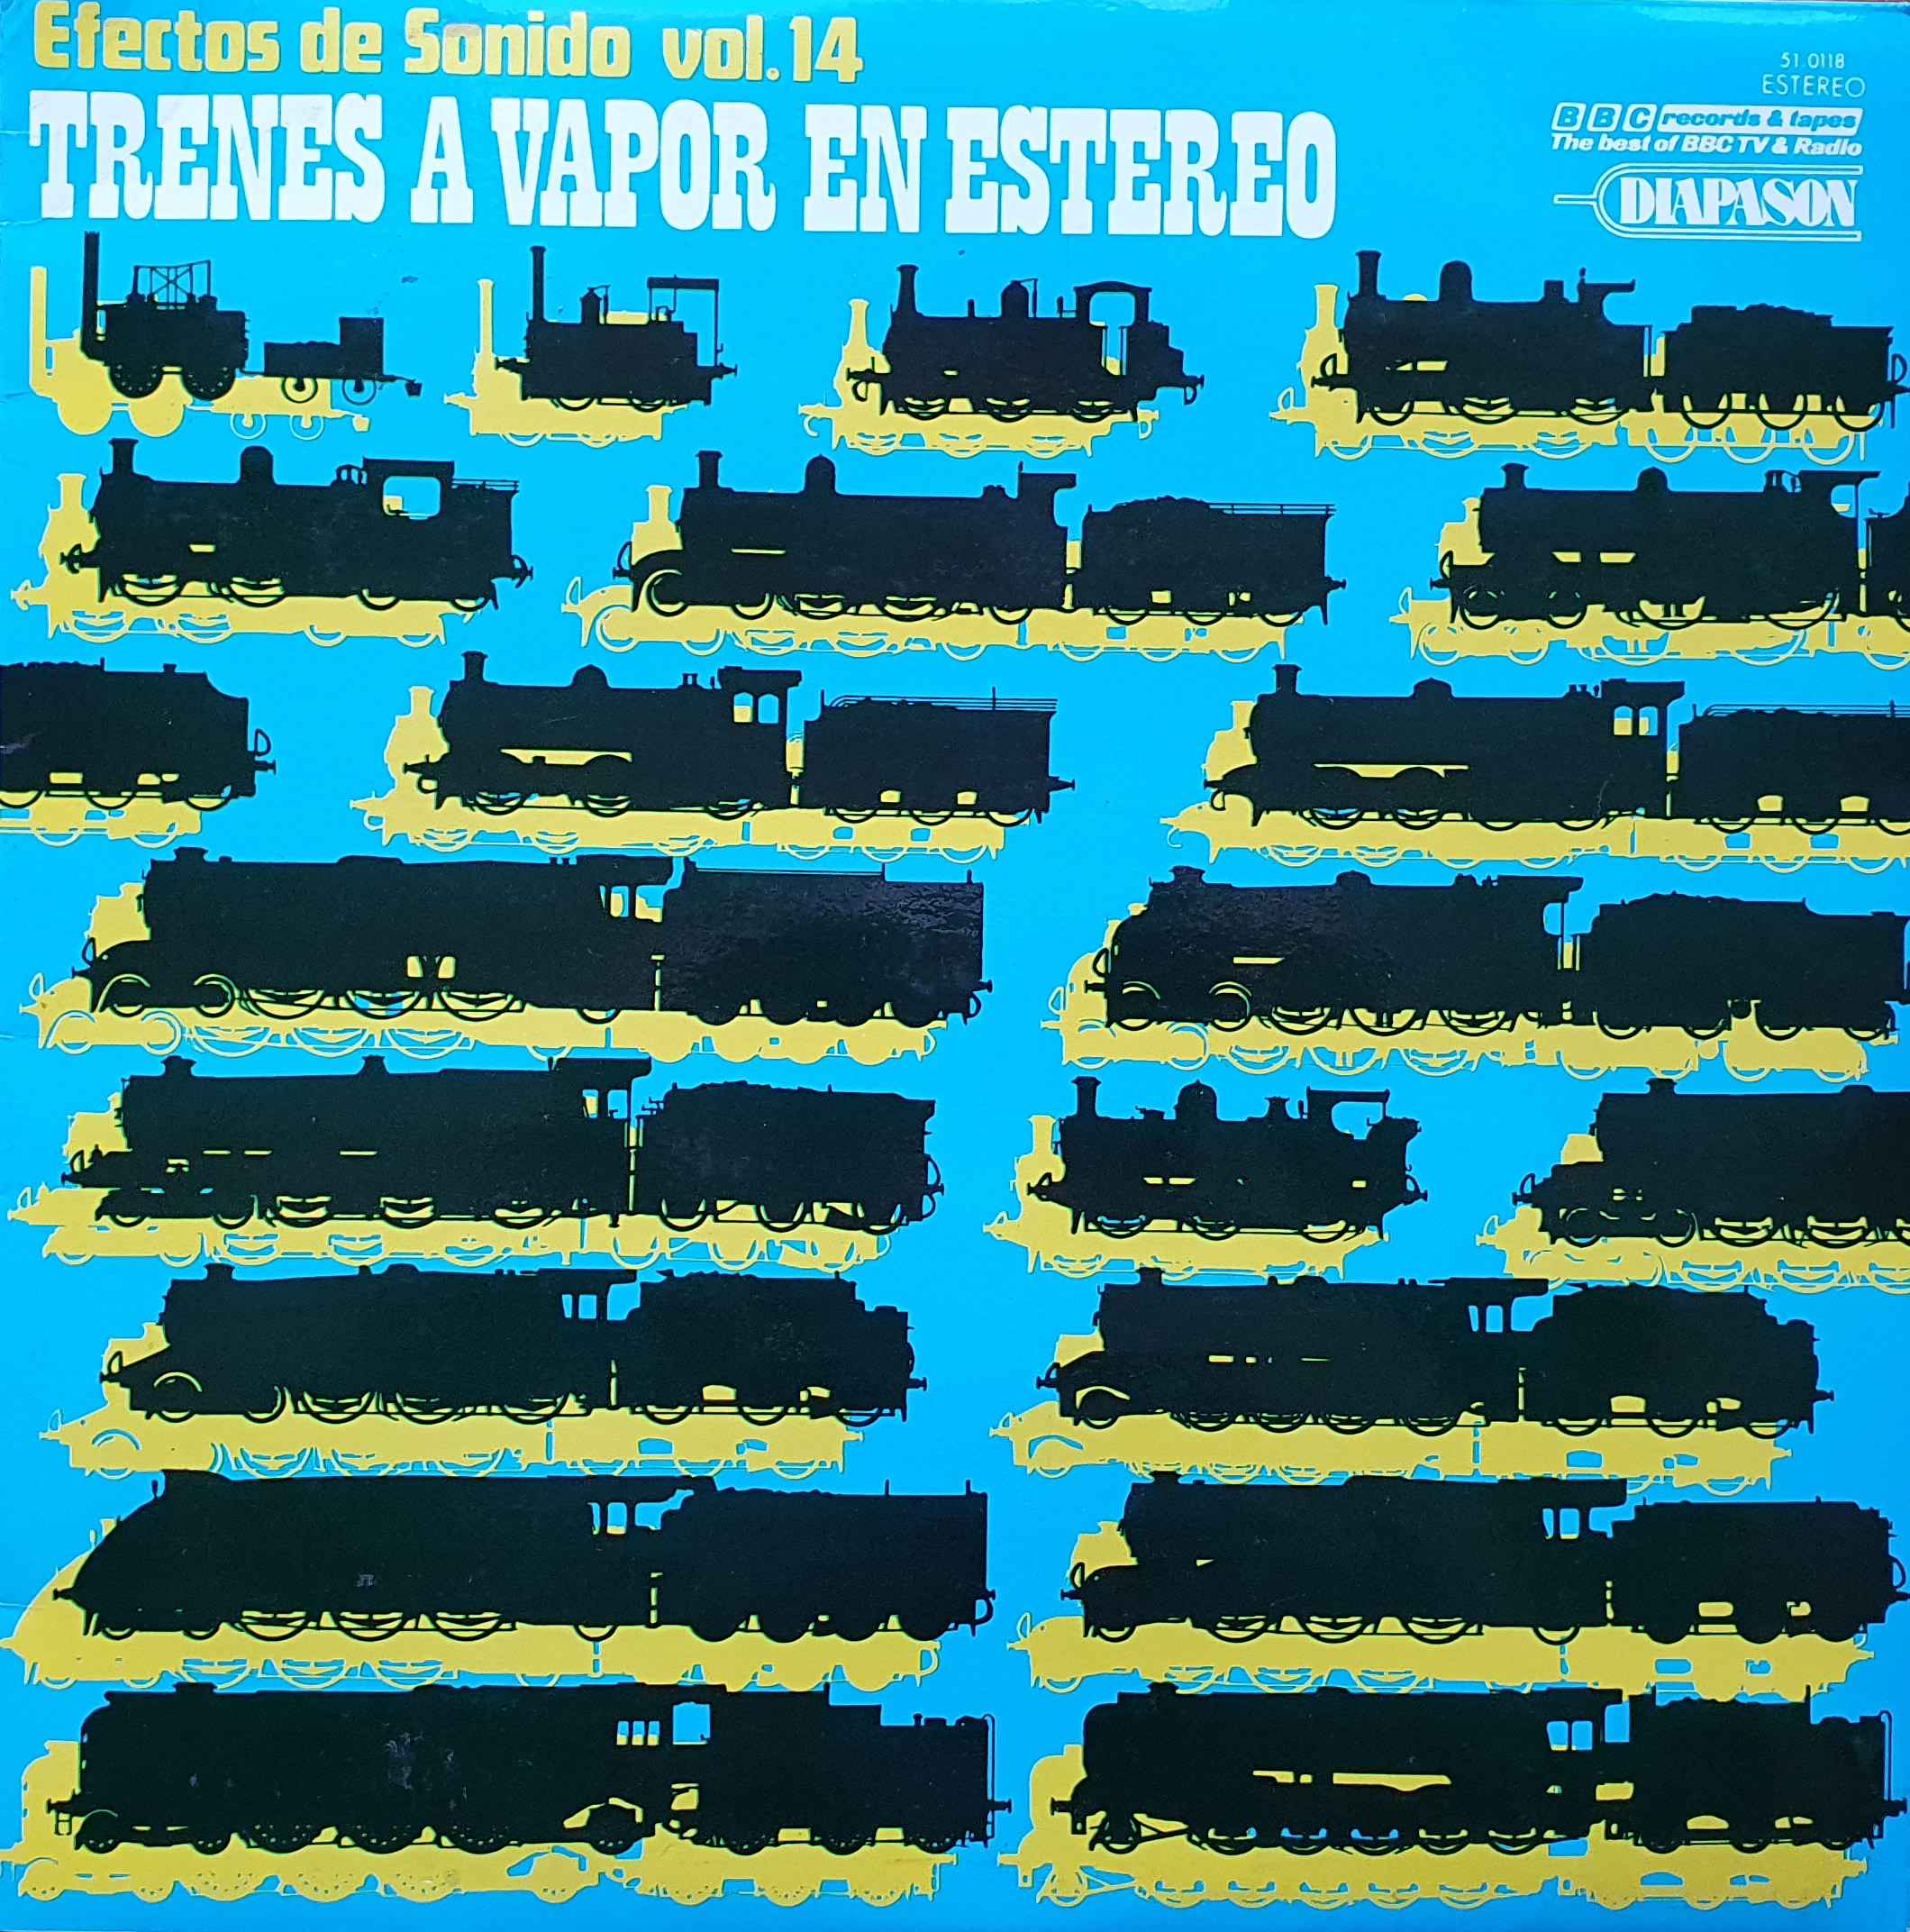 Picture of 51.0118 Trenes a vapor en estereo. Efectos de Sonido Vol. 14 by artist Various from the BBC albums - Records and Tapes library